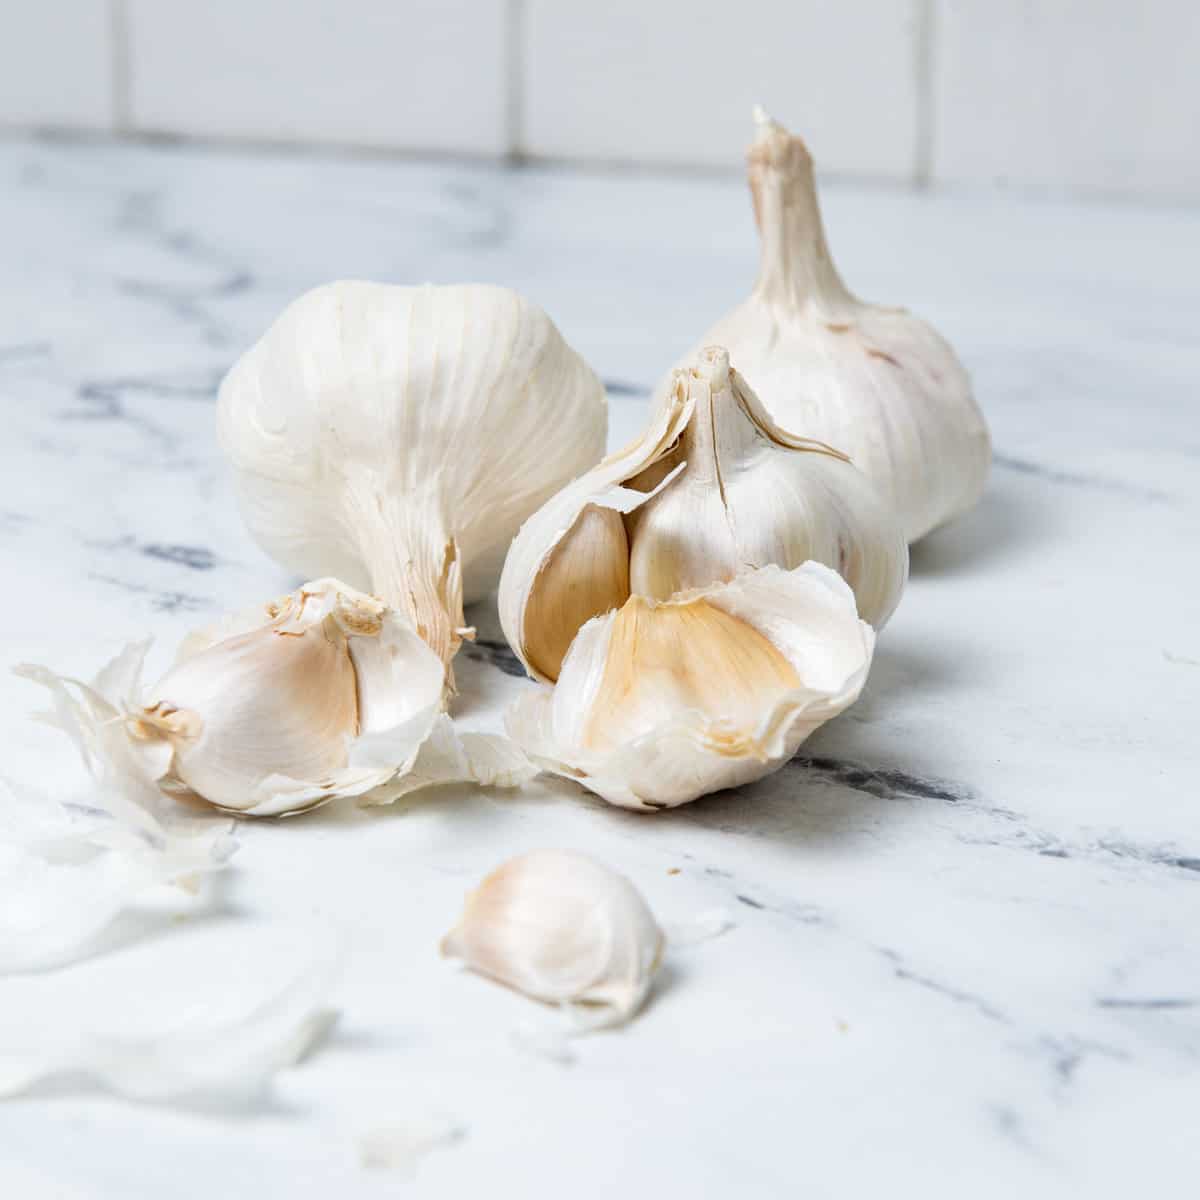 Garlic bulbs and cloves on counter top.